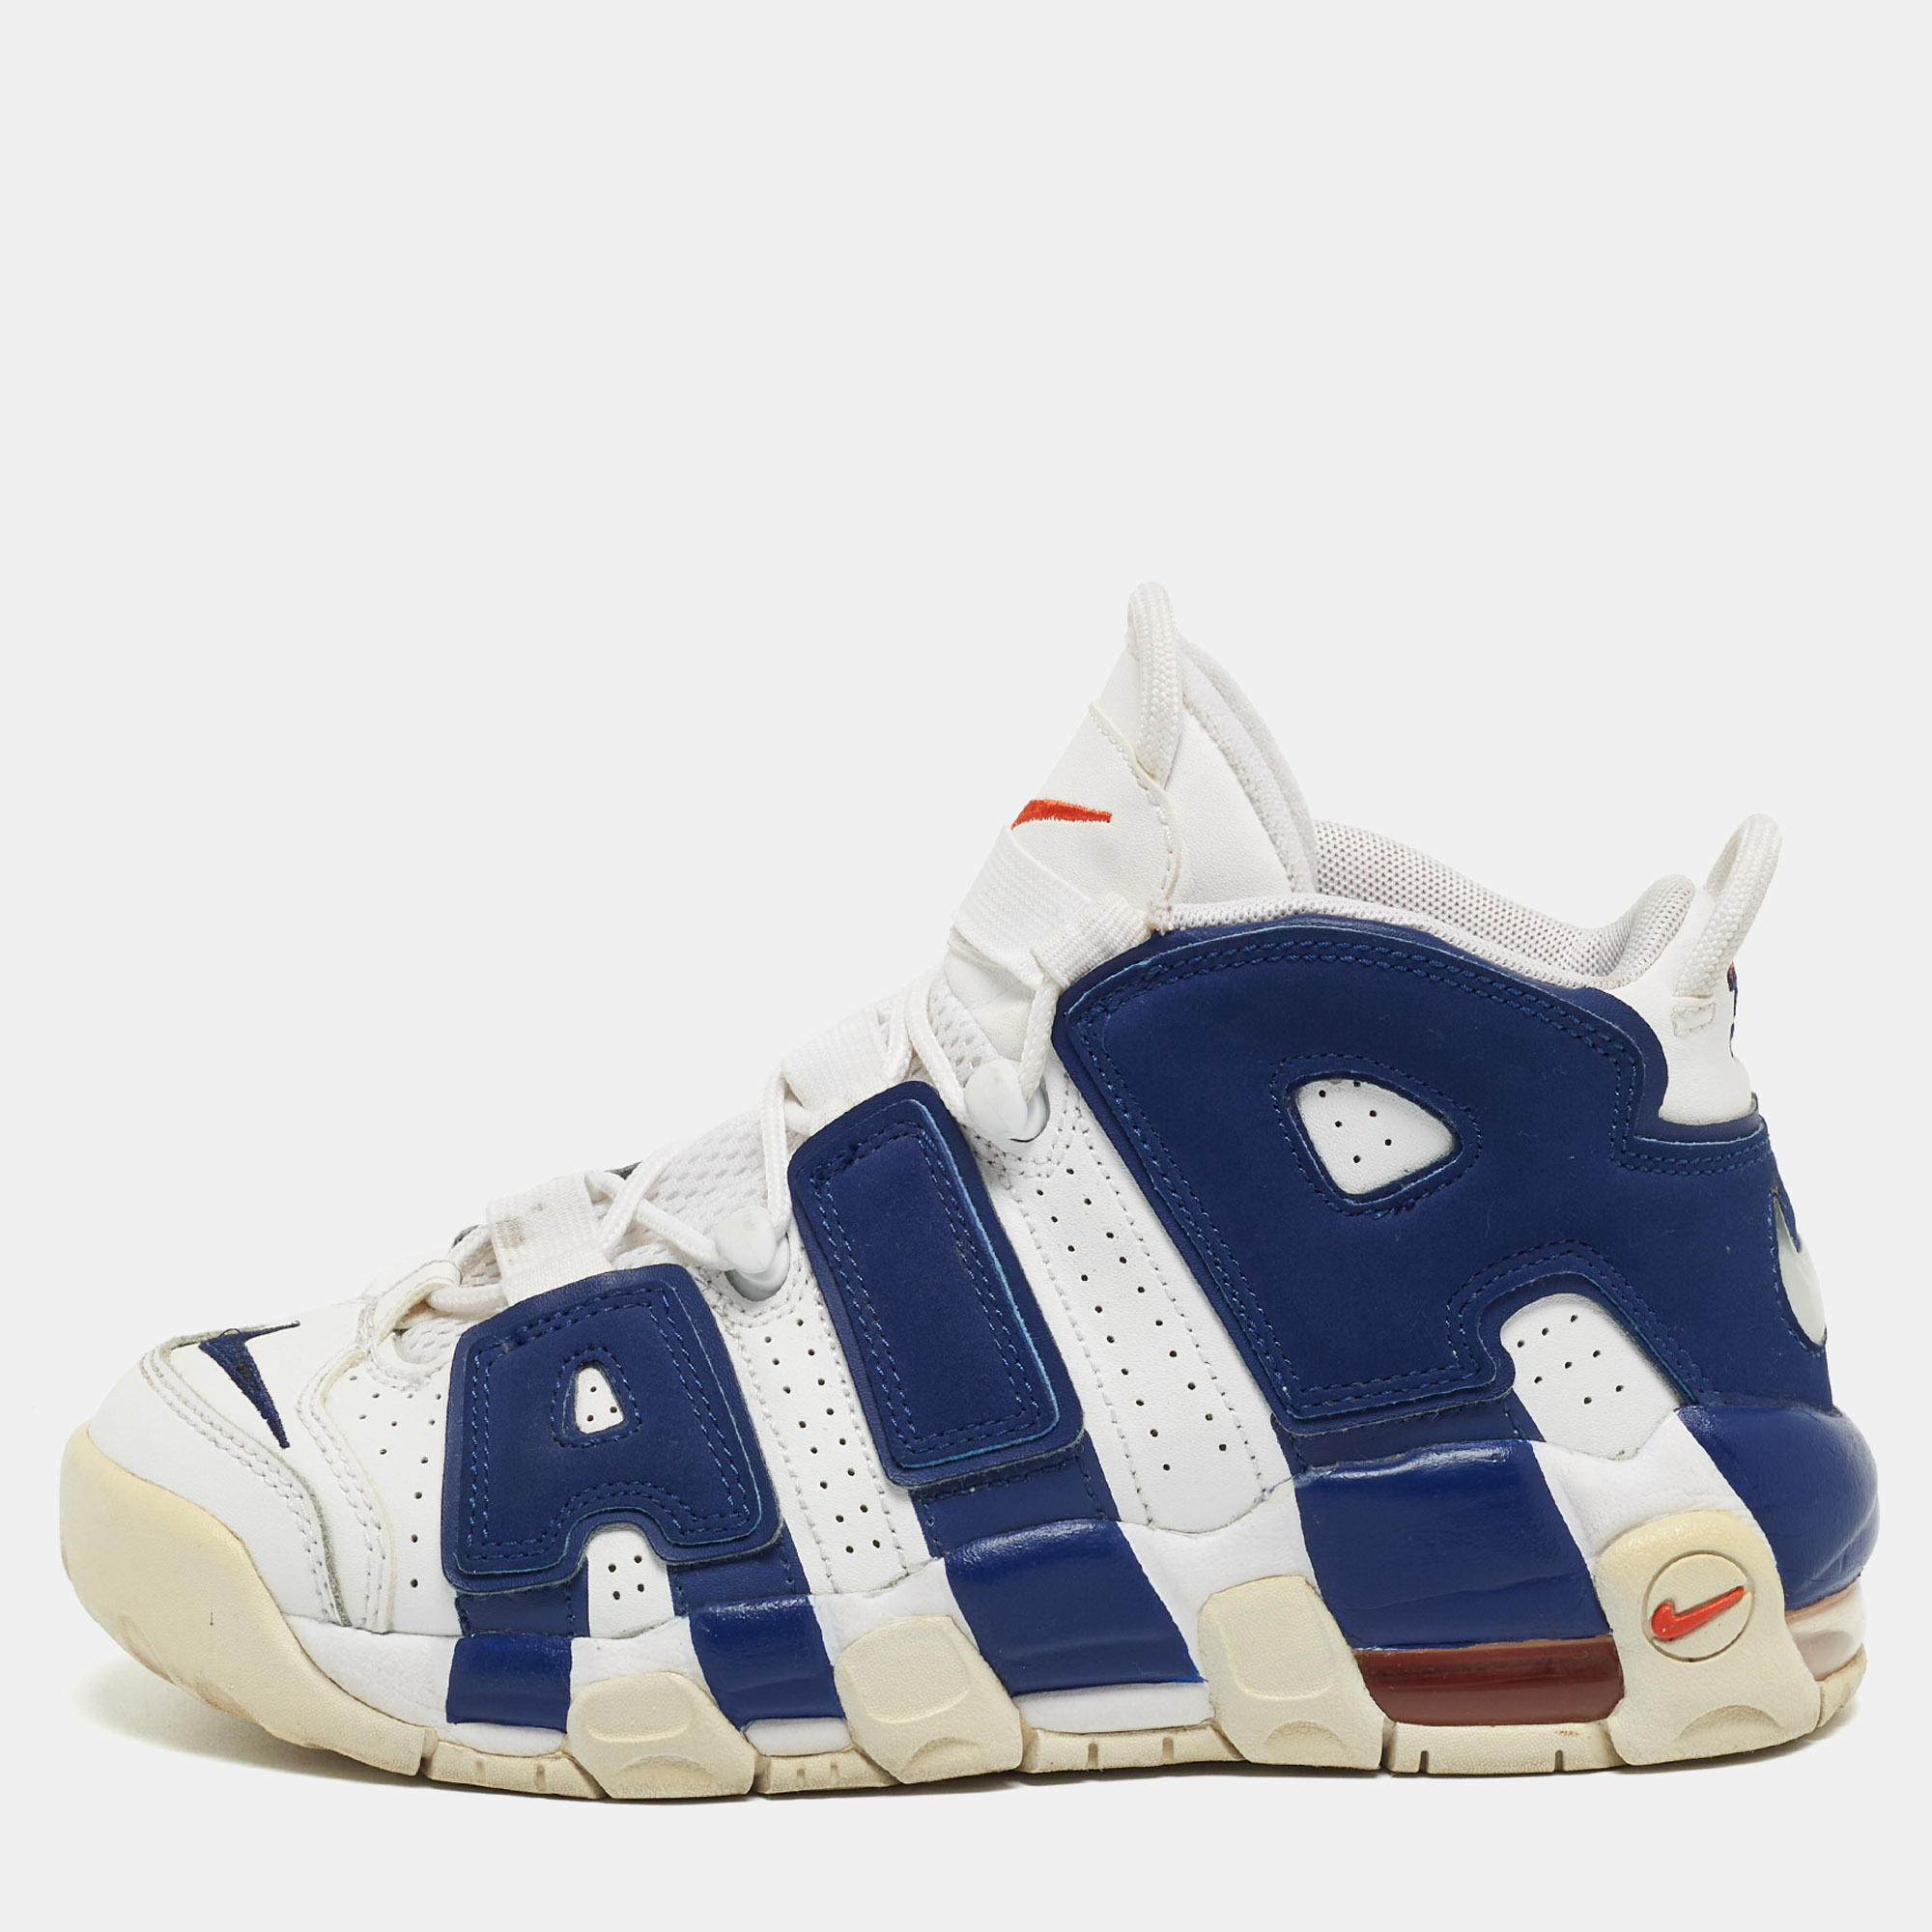 

Nike Air White/Blue Leather More Uptempo Knicks Sneakers Size